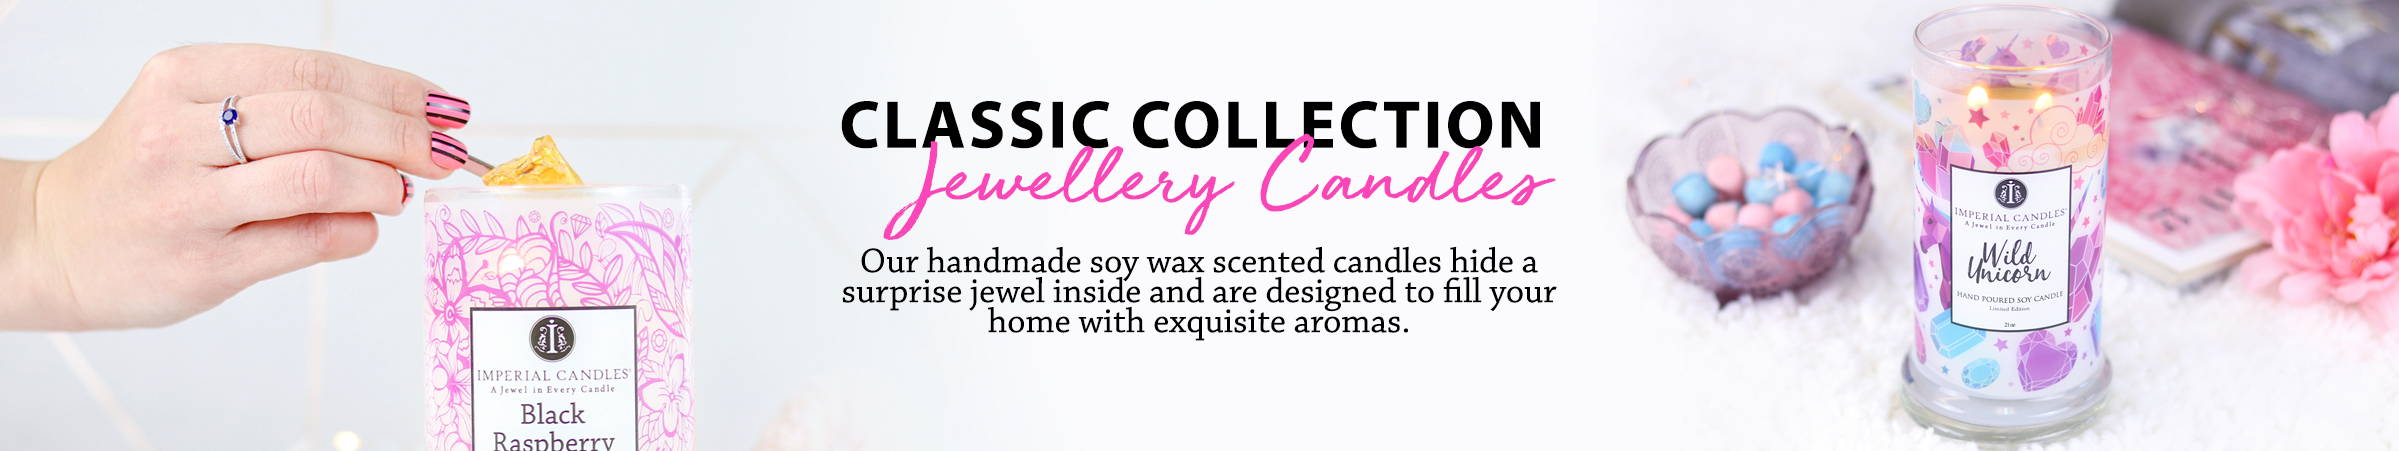 Classic Collection – Imperial Candles